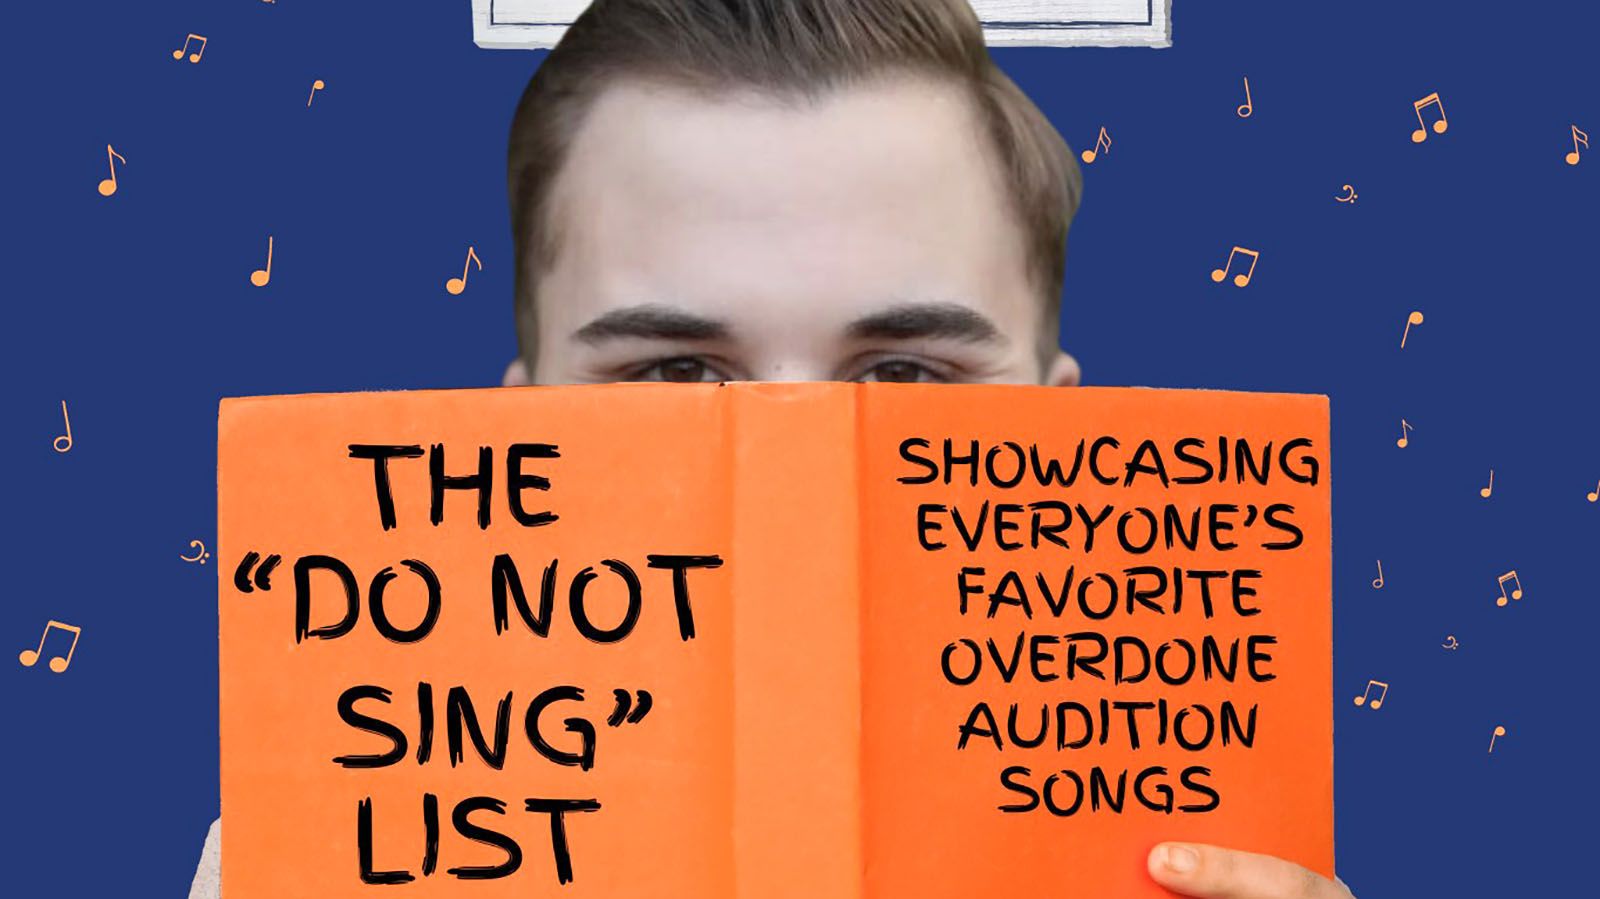 Indiana Musical Theatre Foundation's "The 'Do Not Sing' List" will be put on June 14-15 at RKF Studios.